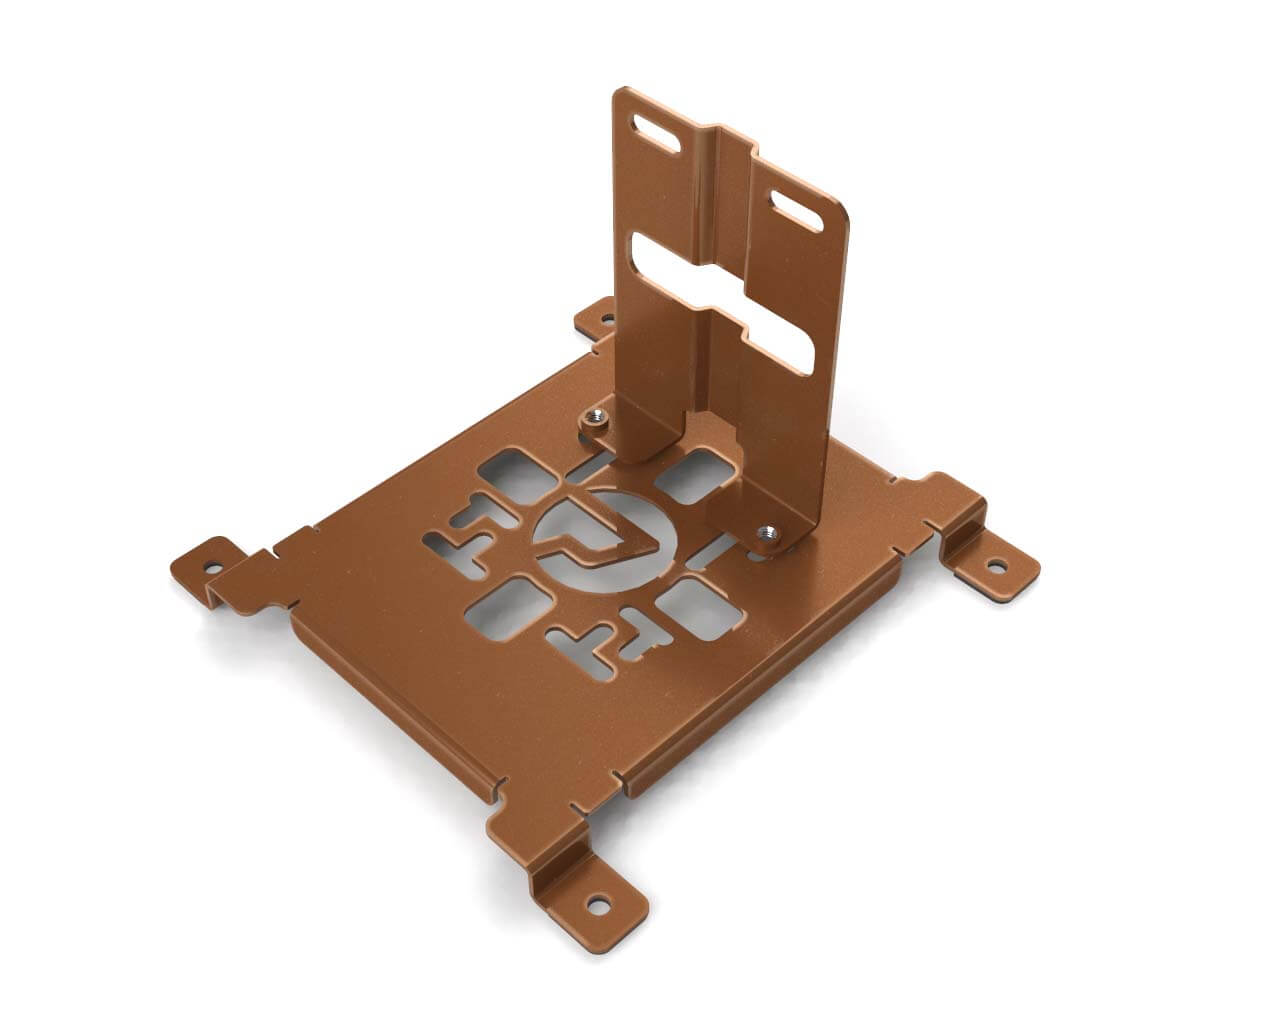 PrimoChill SX CTR2 Spider Mount Bracket Kit - 140mm Series - PrimoChill - KEEPING IT COOL Copper